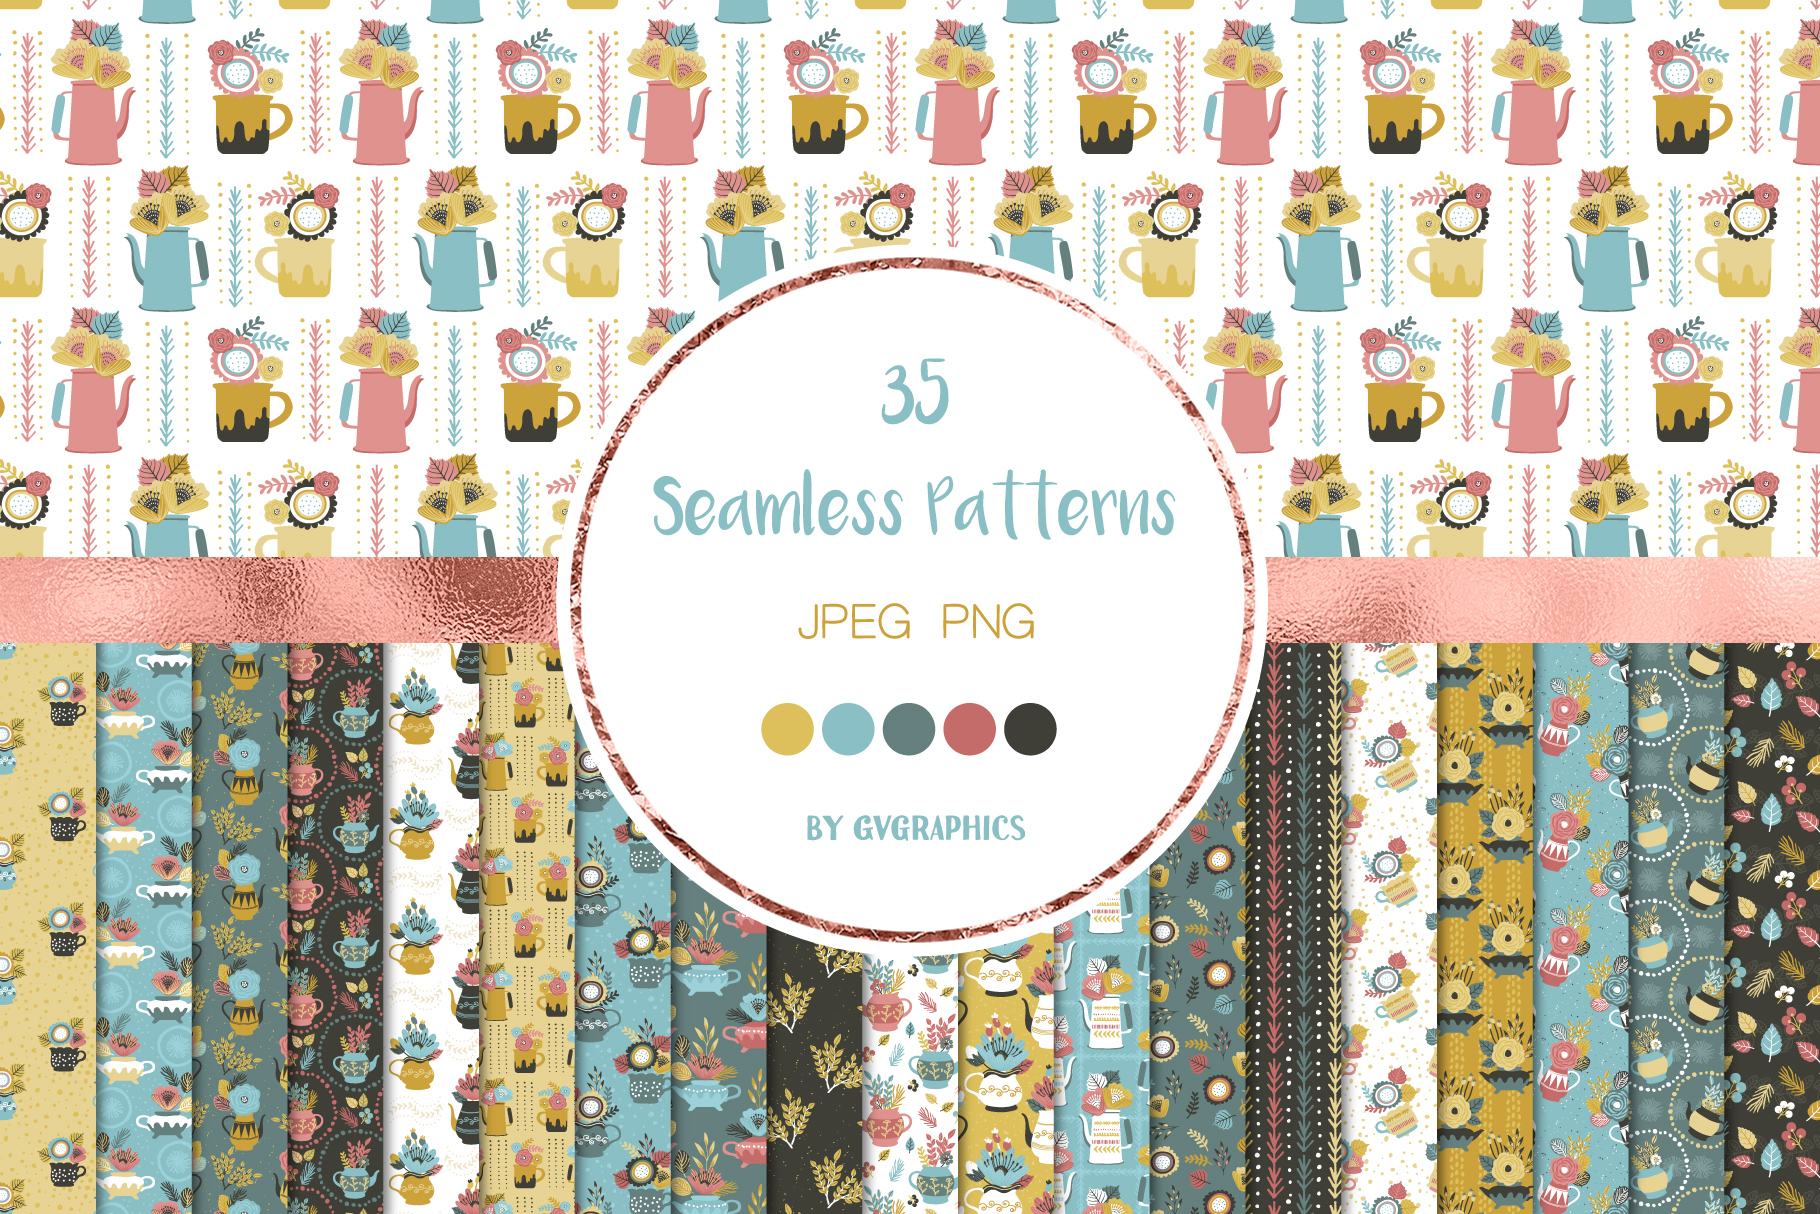 Flowers and Teapots Seamless Patterns.